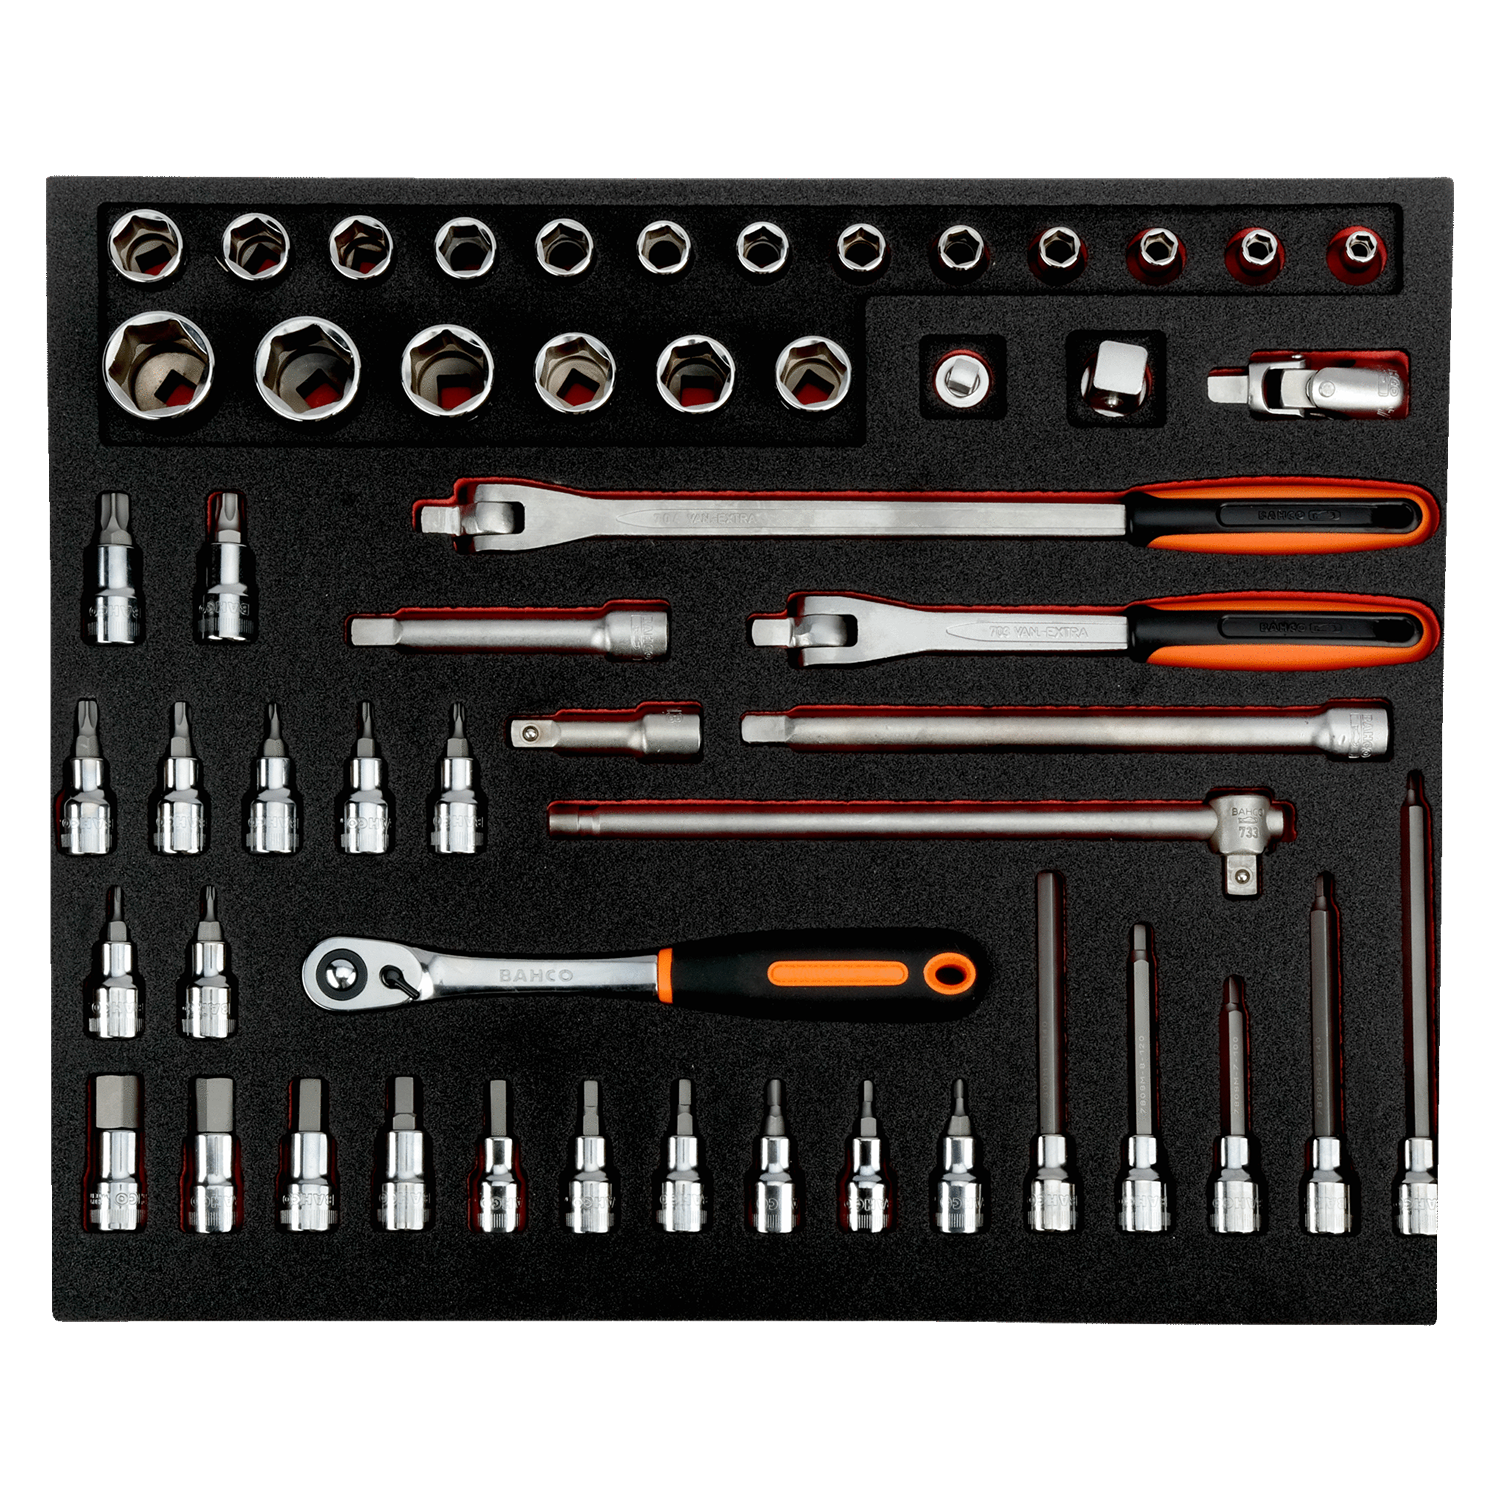 BAHCO FF1A130 Fit&Go 3/3 Foam Socket and Screwdriver Bit Set 53Pc - Premium Socket and Screwdriver Bit Set from BAHCO - Shop now at Yew Aik.